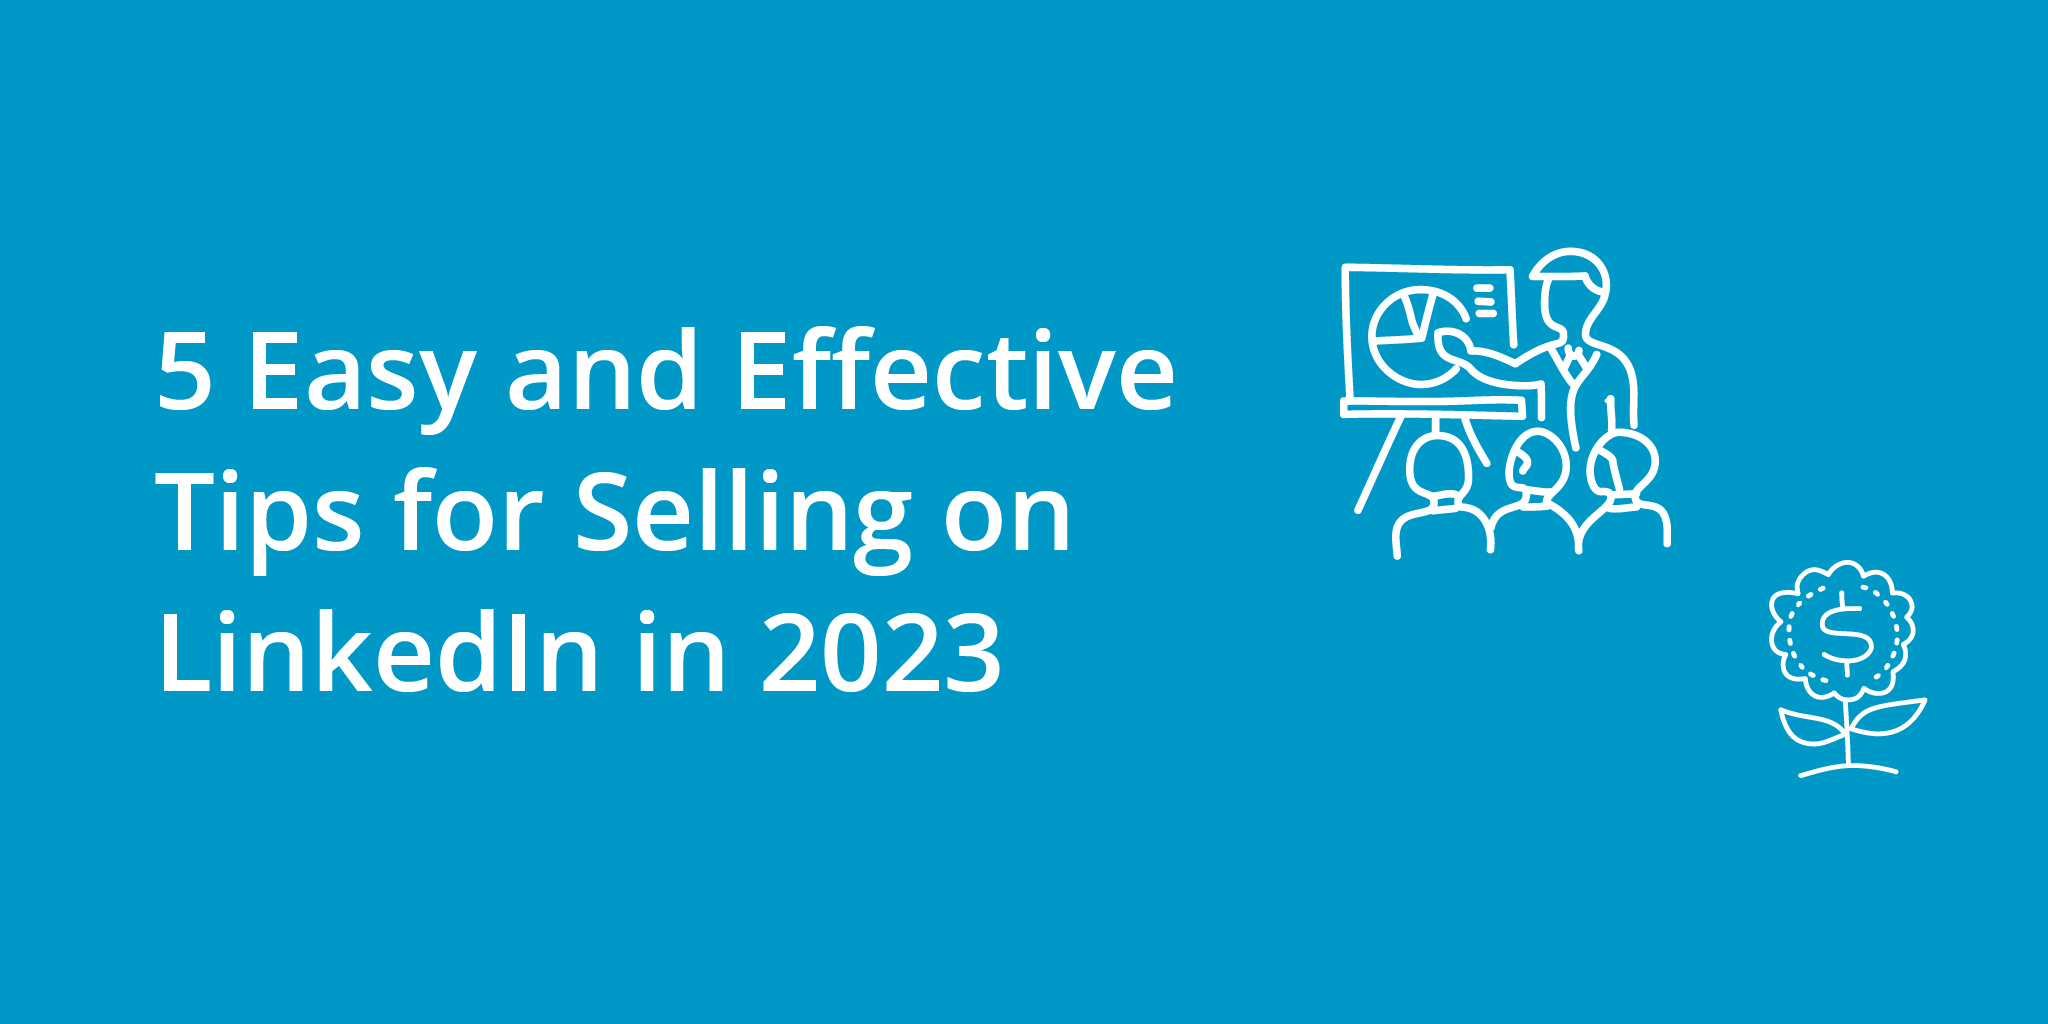 5 Easy and Effective Tips for Selling on LinkedIn in 2023 | Telephones for business